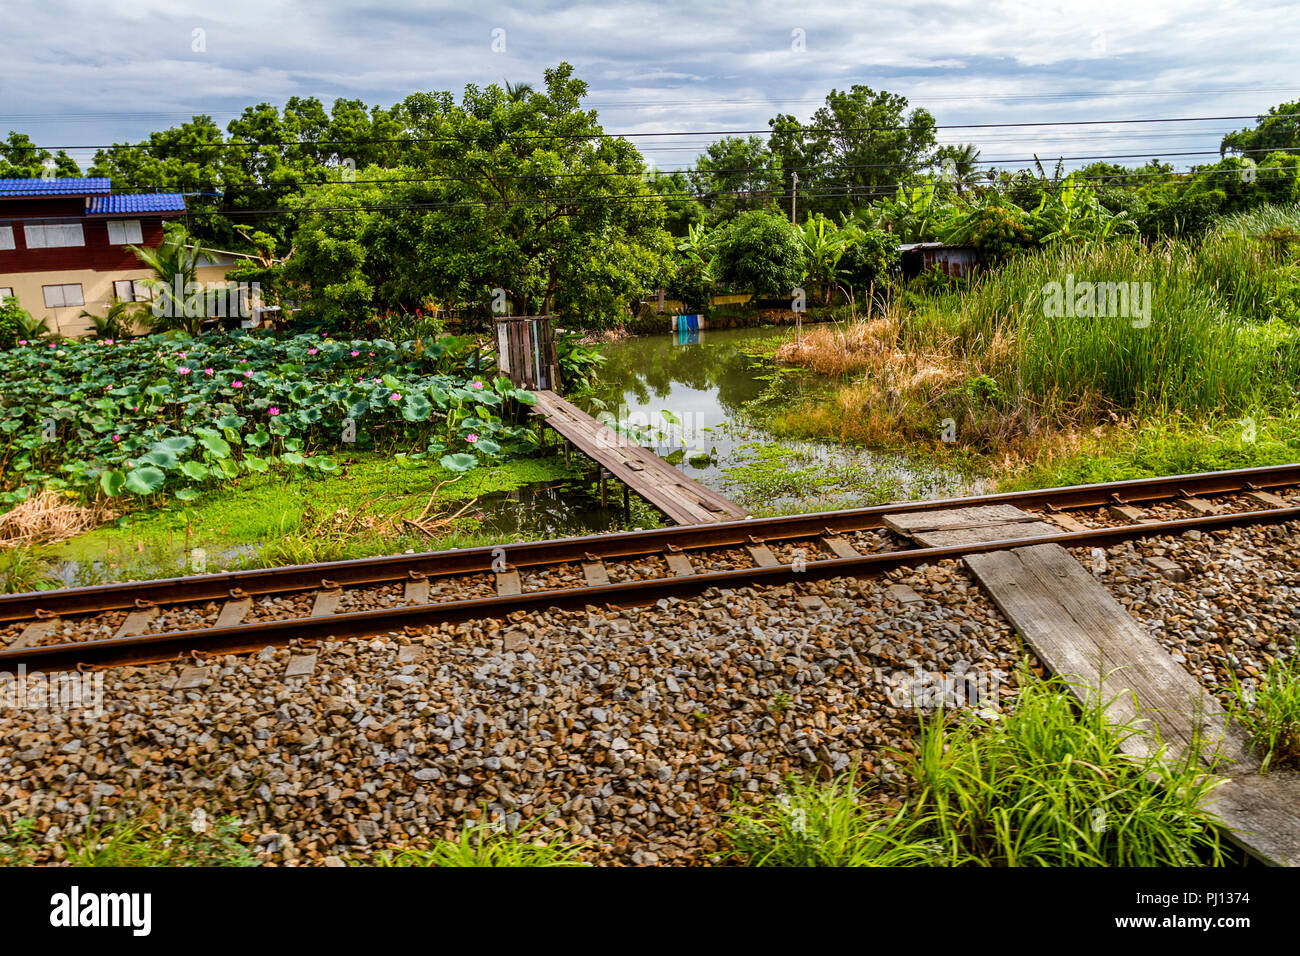 A path running over the train tracks in Thailand Stock Photo